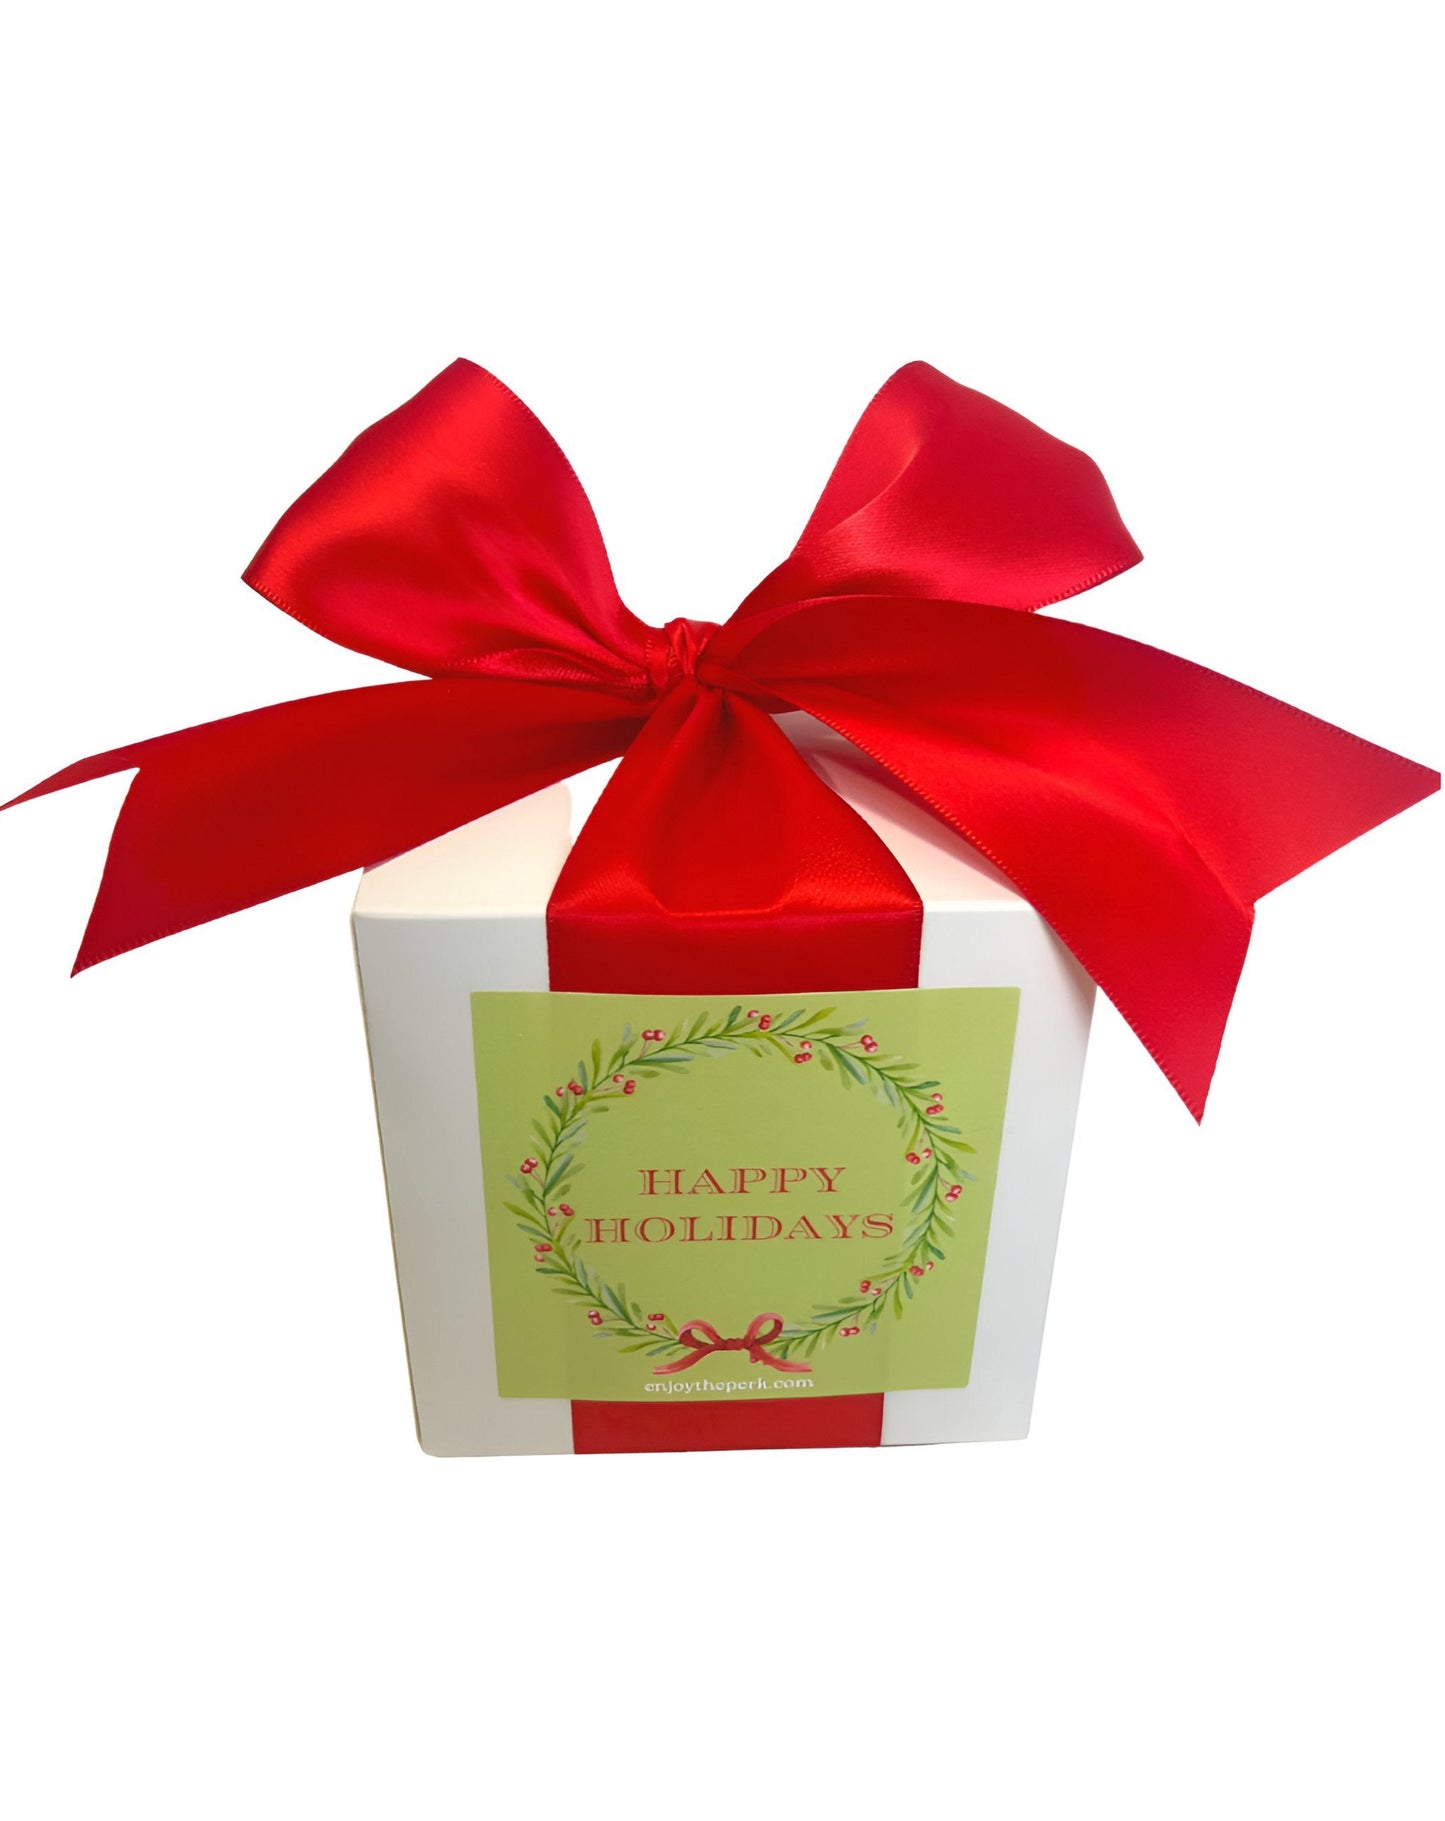 Boxed Holiday Candle